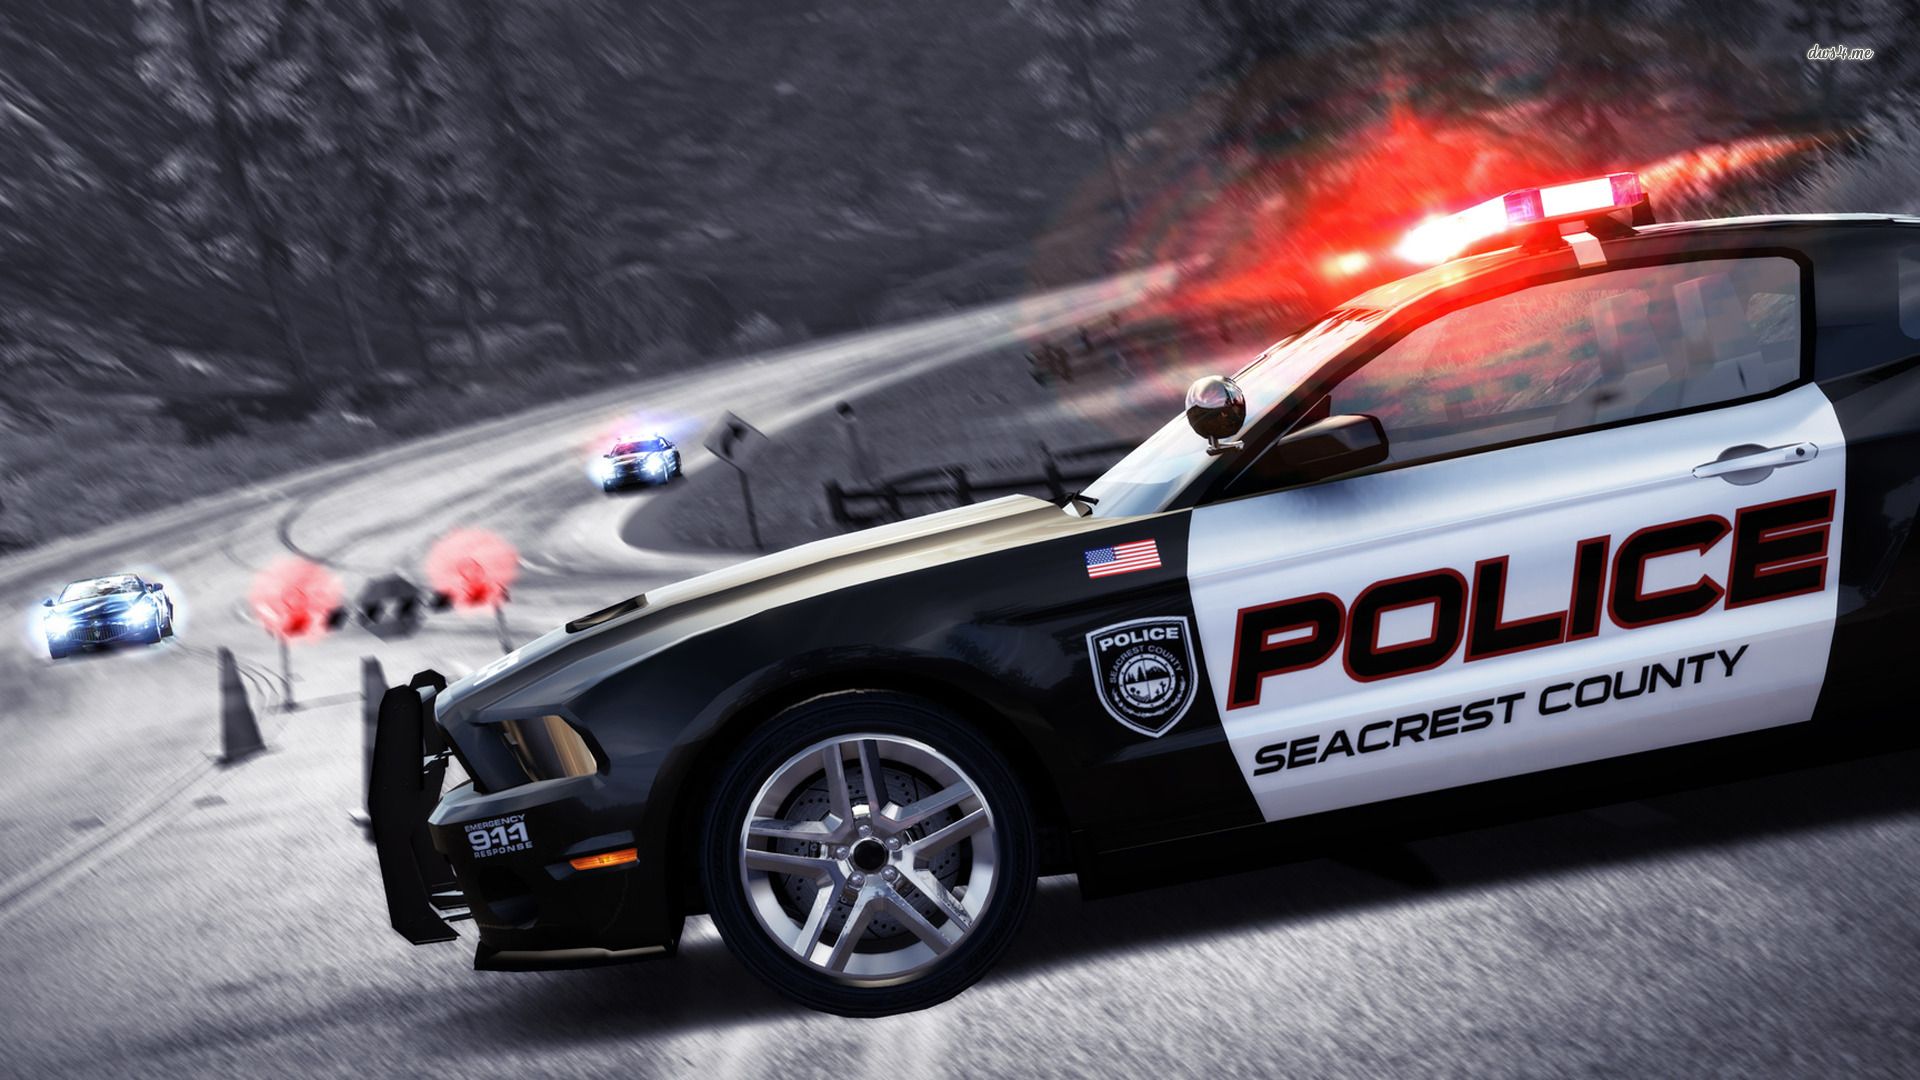 Free download Speed Hot Pursuit police car wallpaper Game wallpaper 13119 [1920x1080] for your Desktop, Mobile & Tablet. Explore Police Car Wallpaper. Law Enforcement Wallpaper, Free Police and